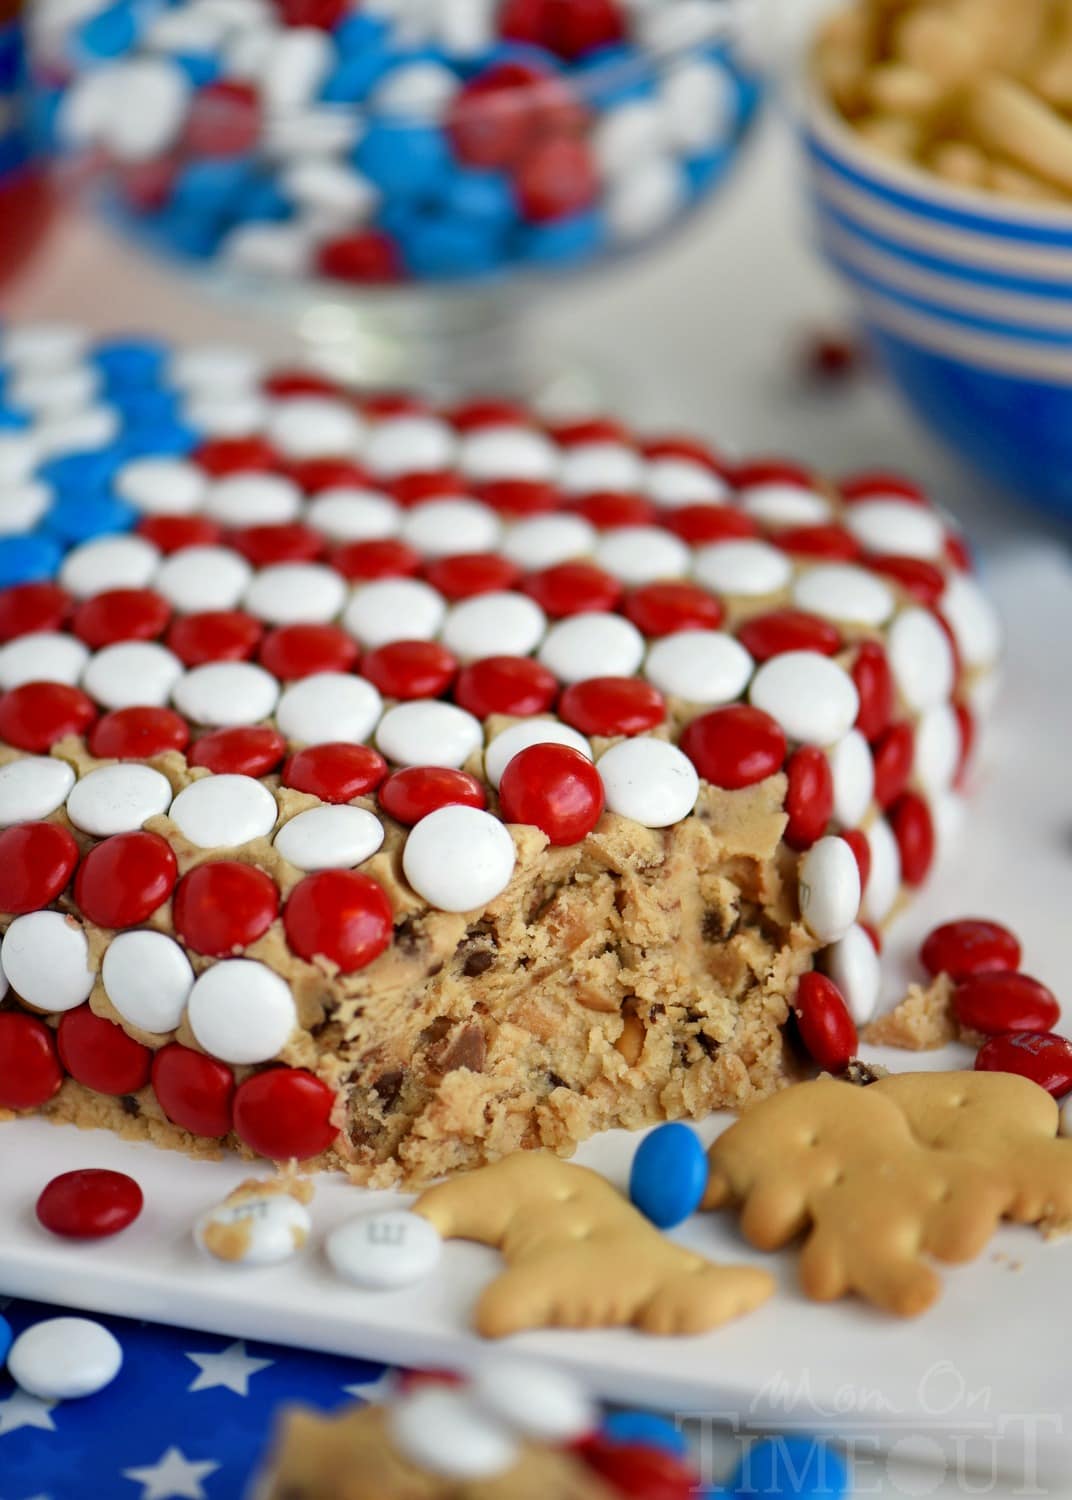 Celebrate with this outrageous Chocolate Chip Cookie Dough Flag Dip this 4th of July weekend! Edible chocolate chip cookie dough is loaded with toffee bits and peanut butter chips for the most delicious dip ever! Decorated in red, white, and blue, this easy dessert recipe is perfect for Memorial Day and Labor Day weekend as well!